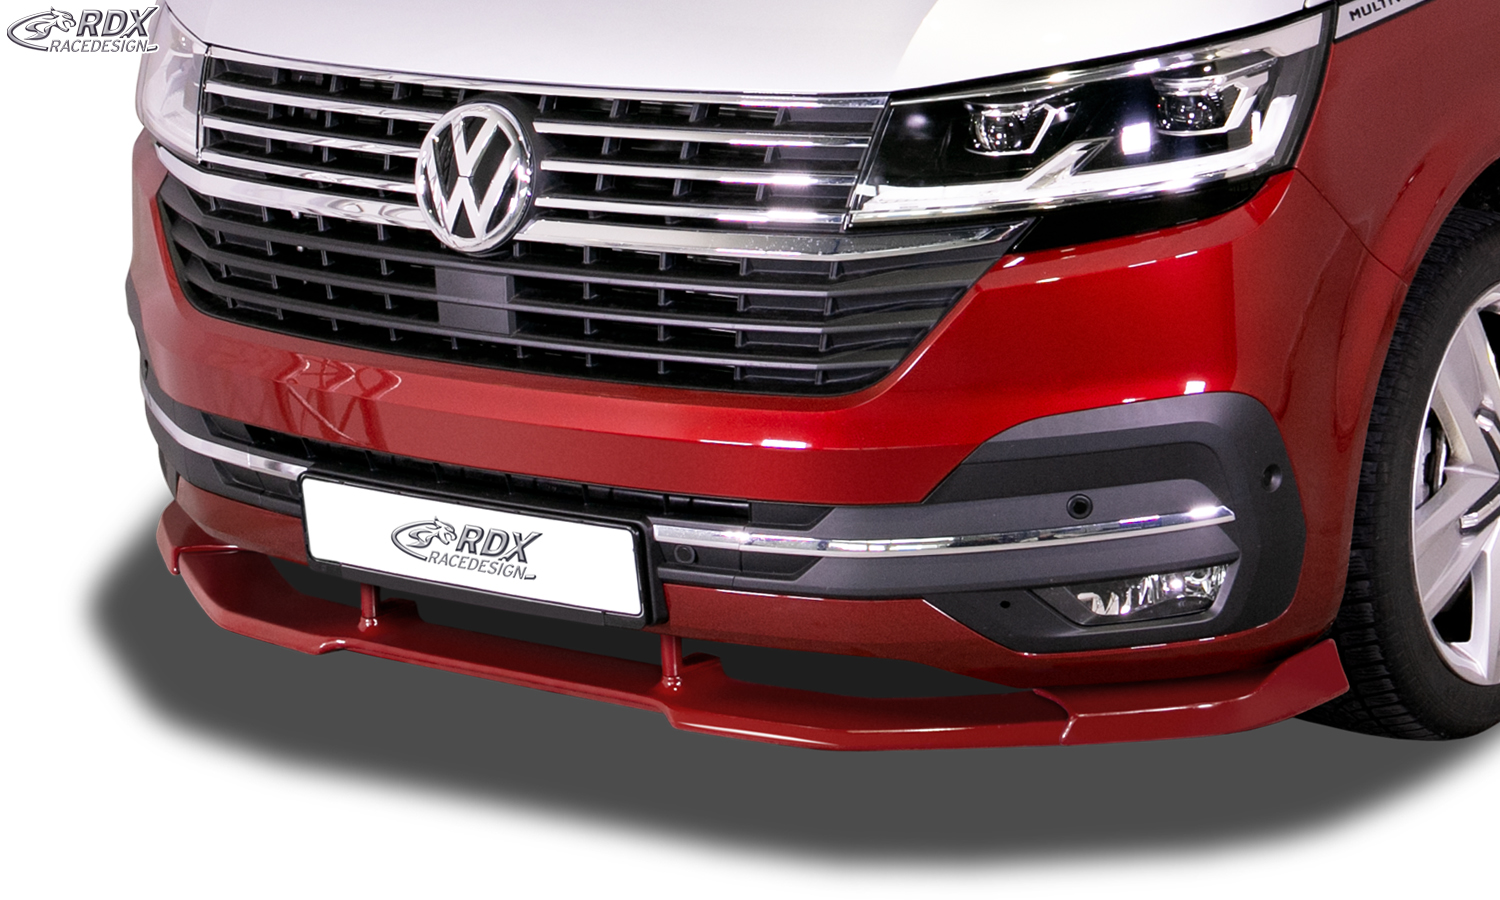 RDFAVX30910 - RDX Front Spoiler VARIO-X for VW T6.1 (for painted and  unpainted bumper) Front Lip Splitter